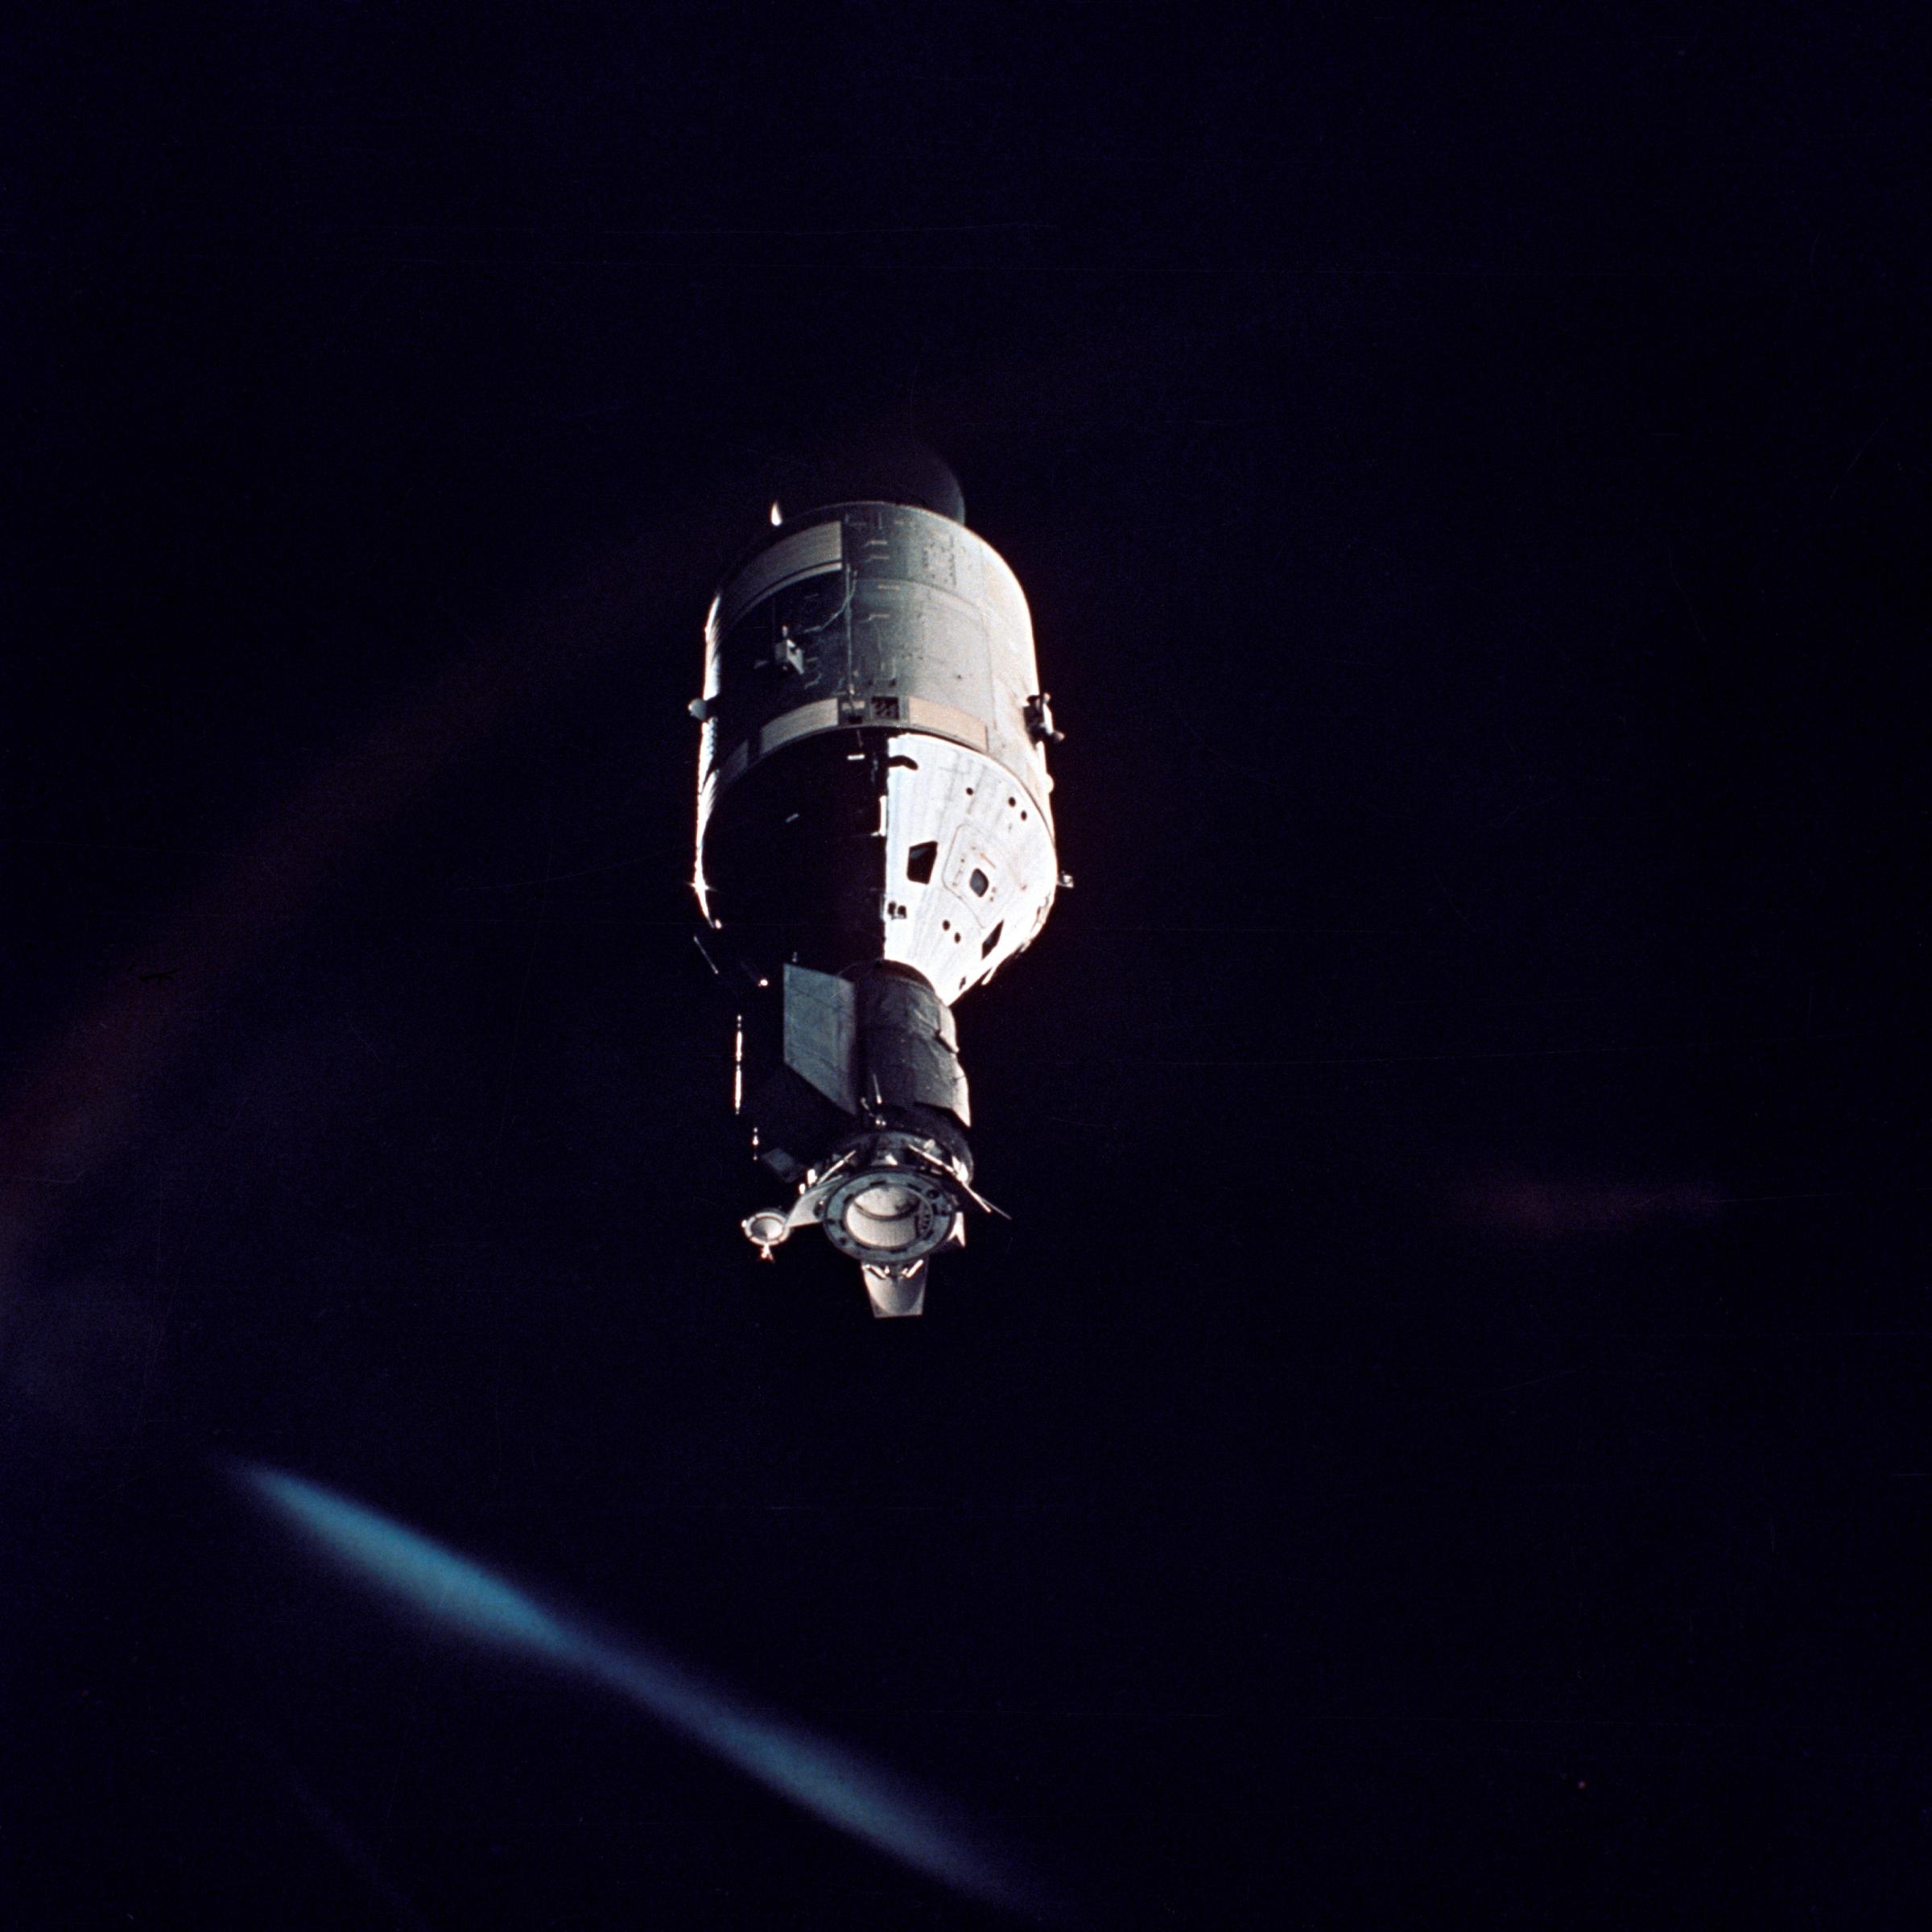 The American Apollo spacecraft as seen in Earth orbit from the Soviet Soyuz 19 spacecraft during the joint U.S.-USSR Apollo Soyuz Test Project (ASTP) mission.